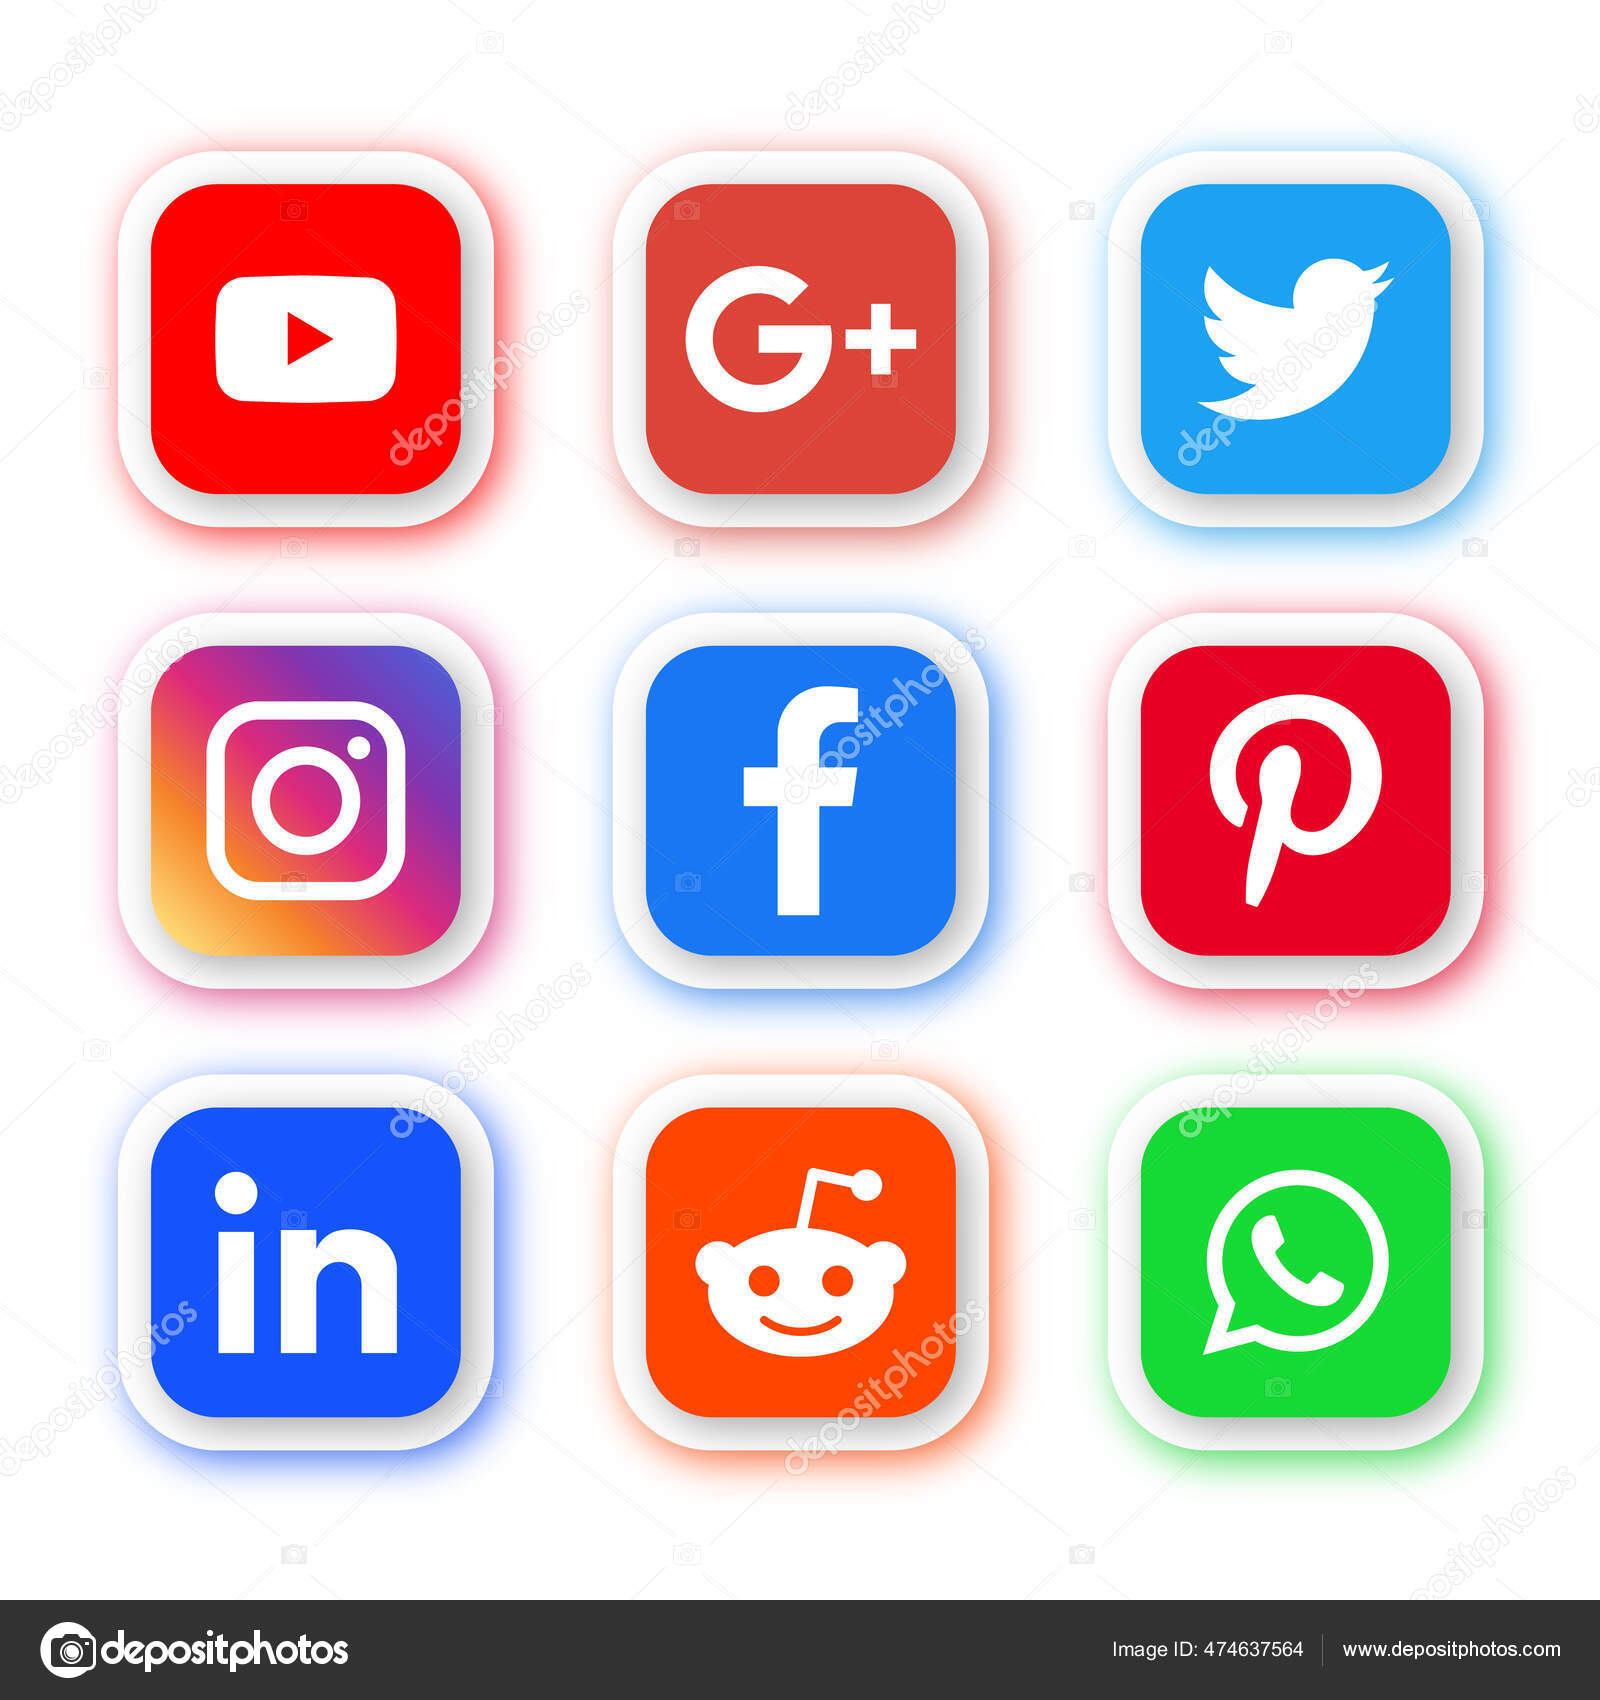 Buttons Sign in with Google, Facebook,  Apple,Twitter,Microsoft,GitHub,Reddit,LinkedIn,Instagram,Pinterest,Dribbble,Spotify.Authenticate  User Login with.Vector Stock Vector